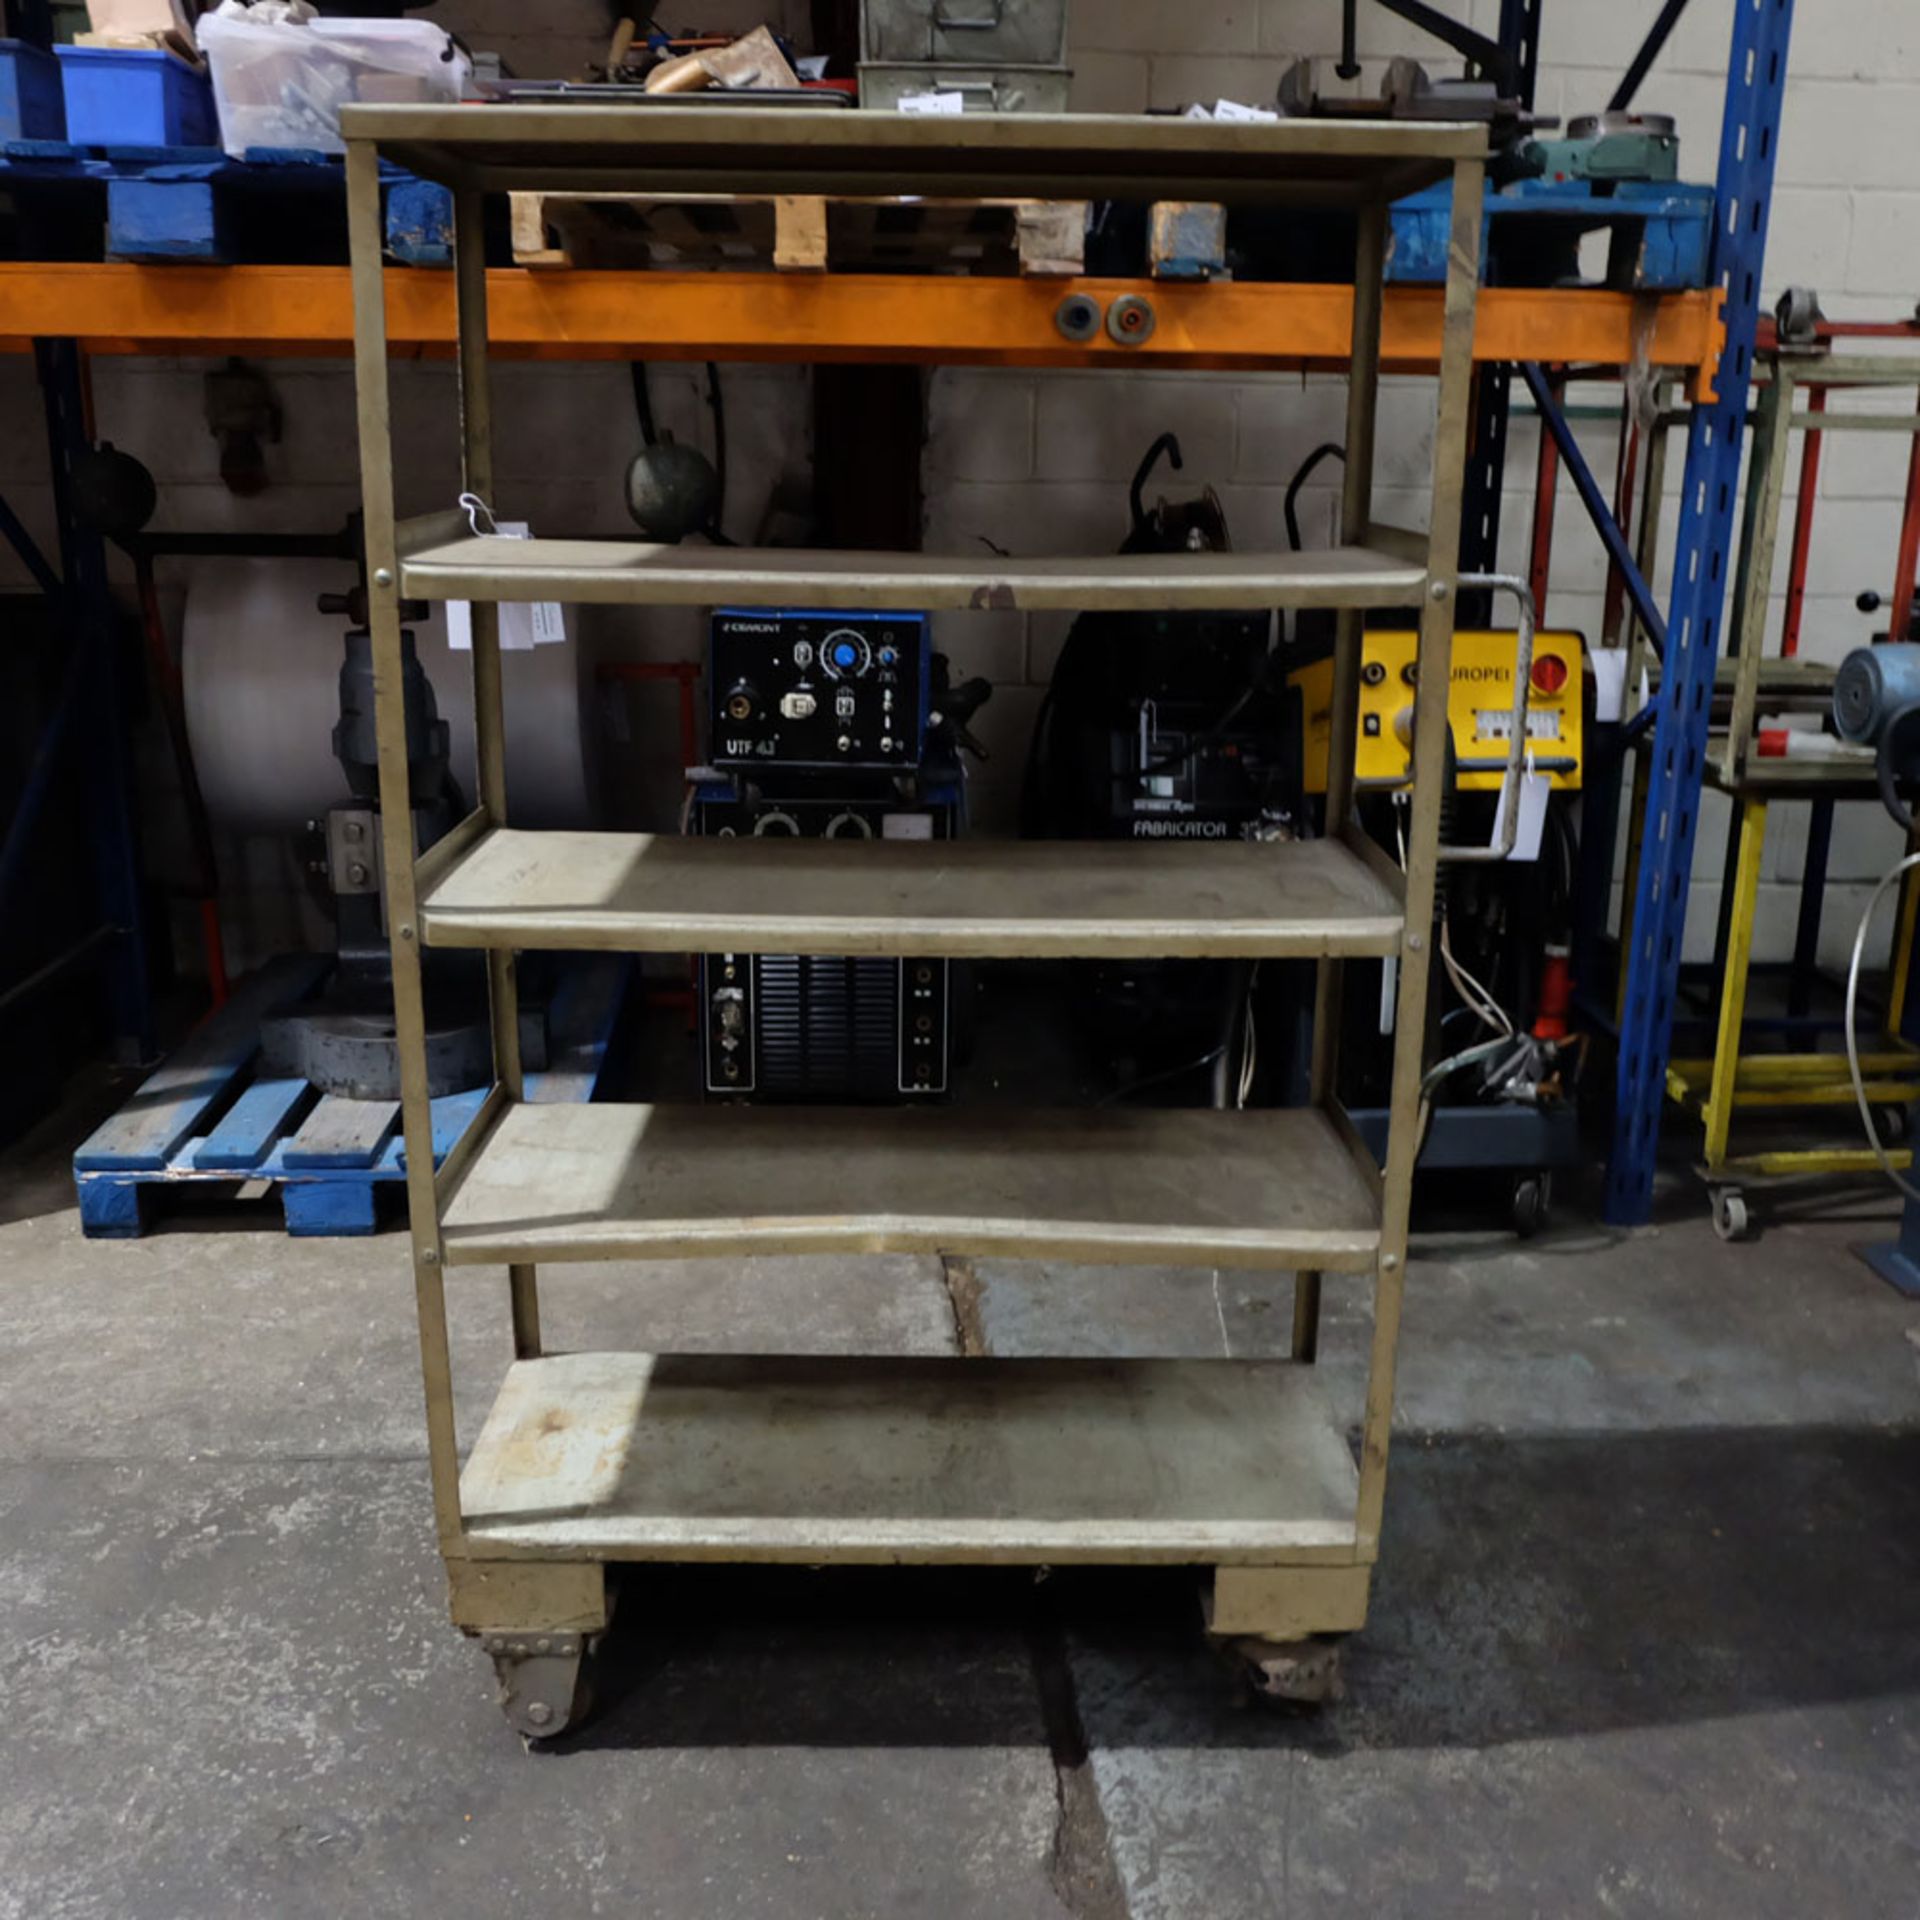 Steel Shelves. Shelf Size Approx 35 1/2" x 15 . Overall Height 60". - Image 5 of 5